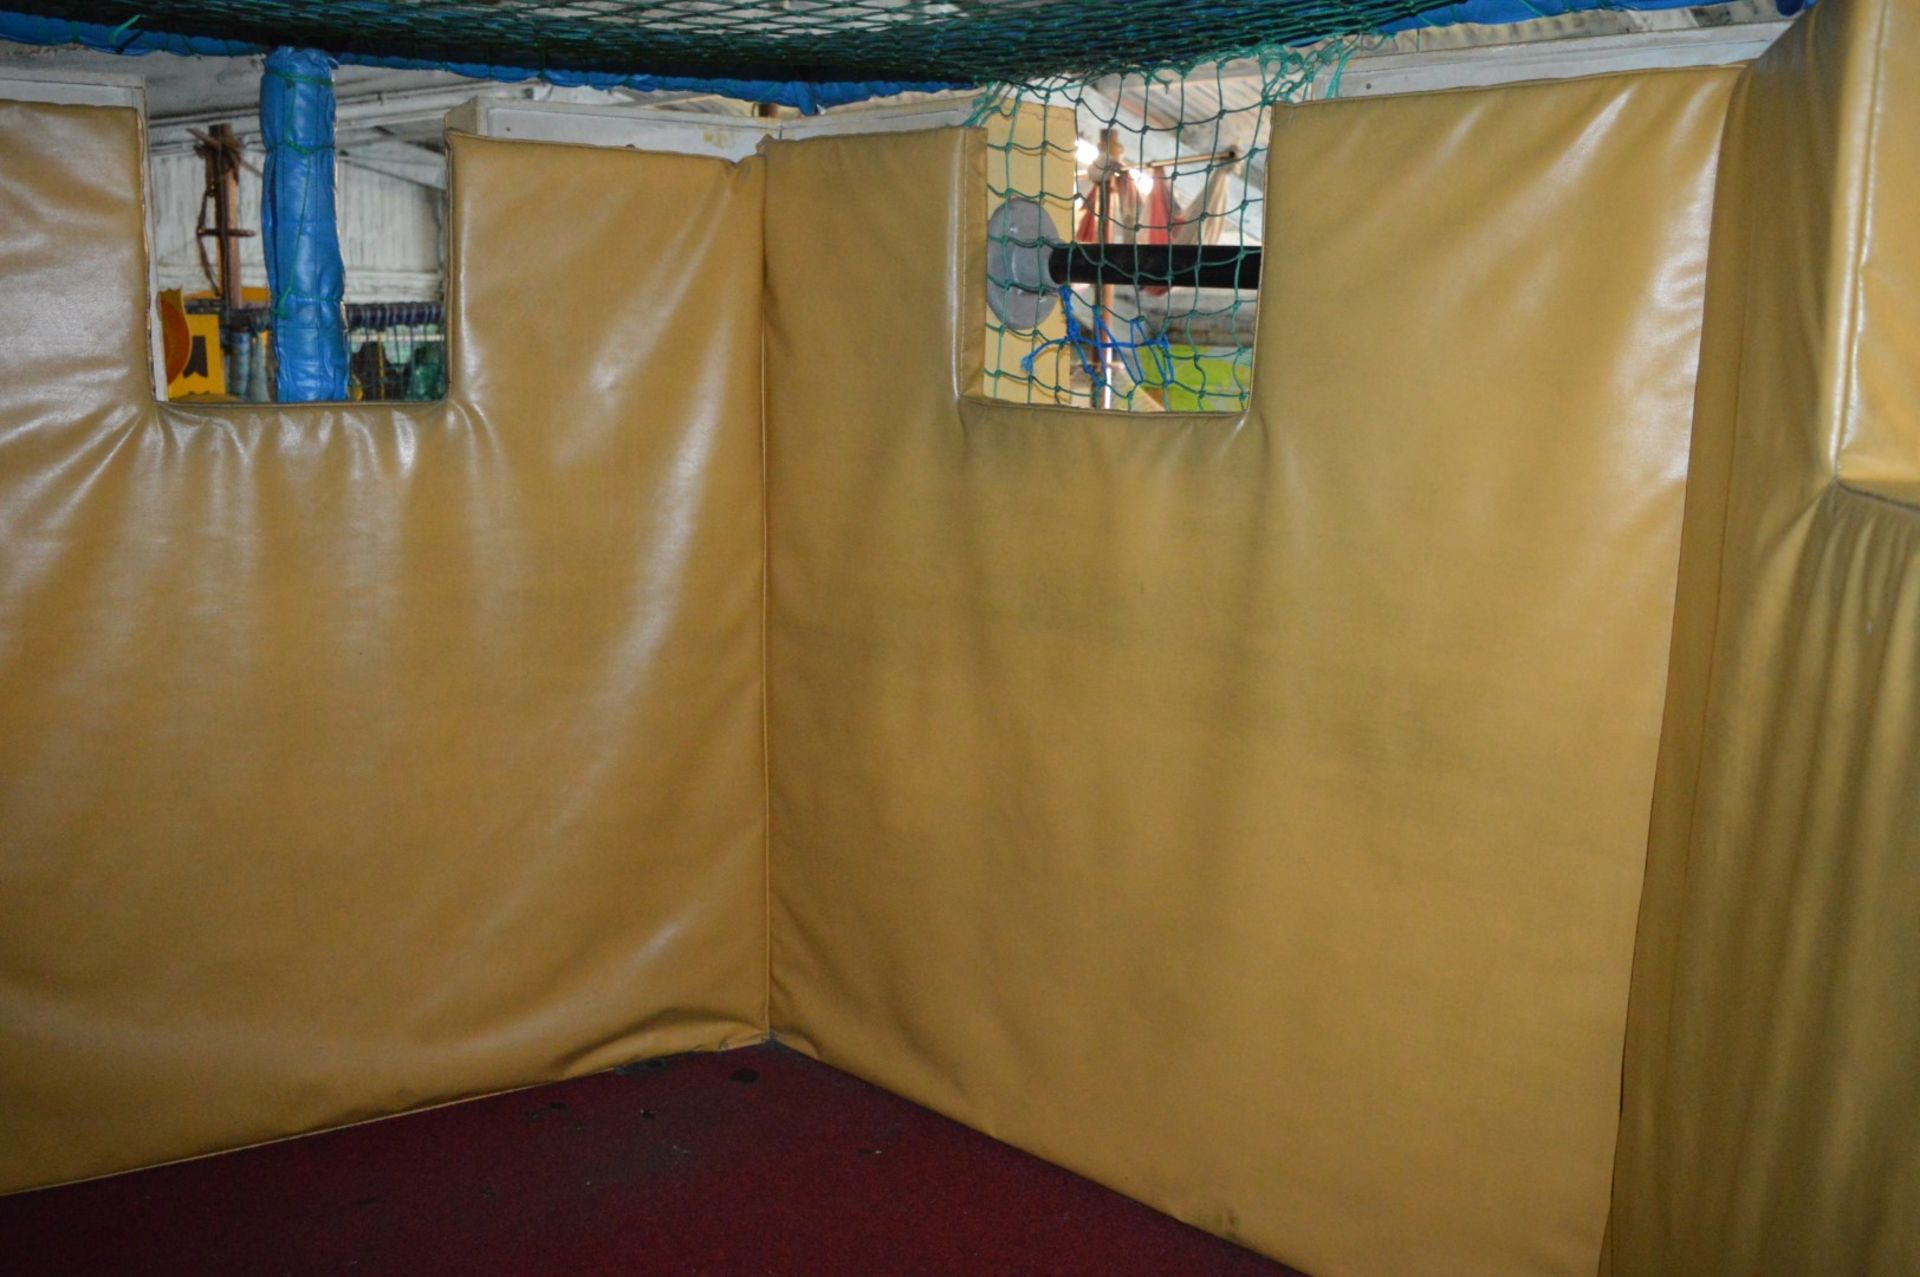 1 x Large Amount of Playcentre Safety Padding and Netting - Includes Lots of Various Designs and - Image 8 of 25